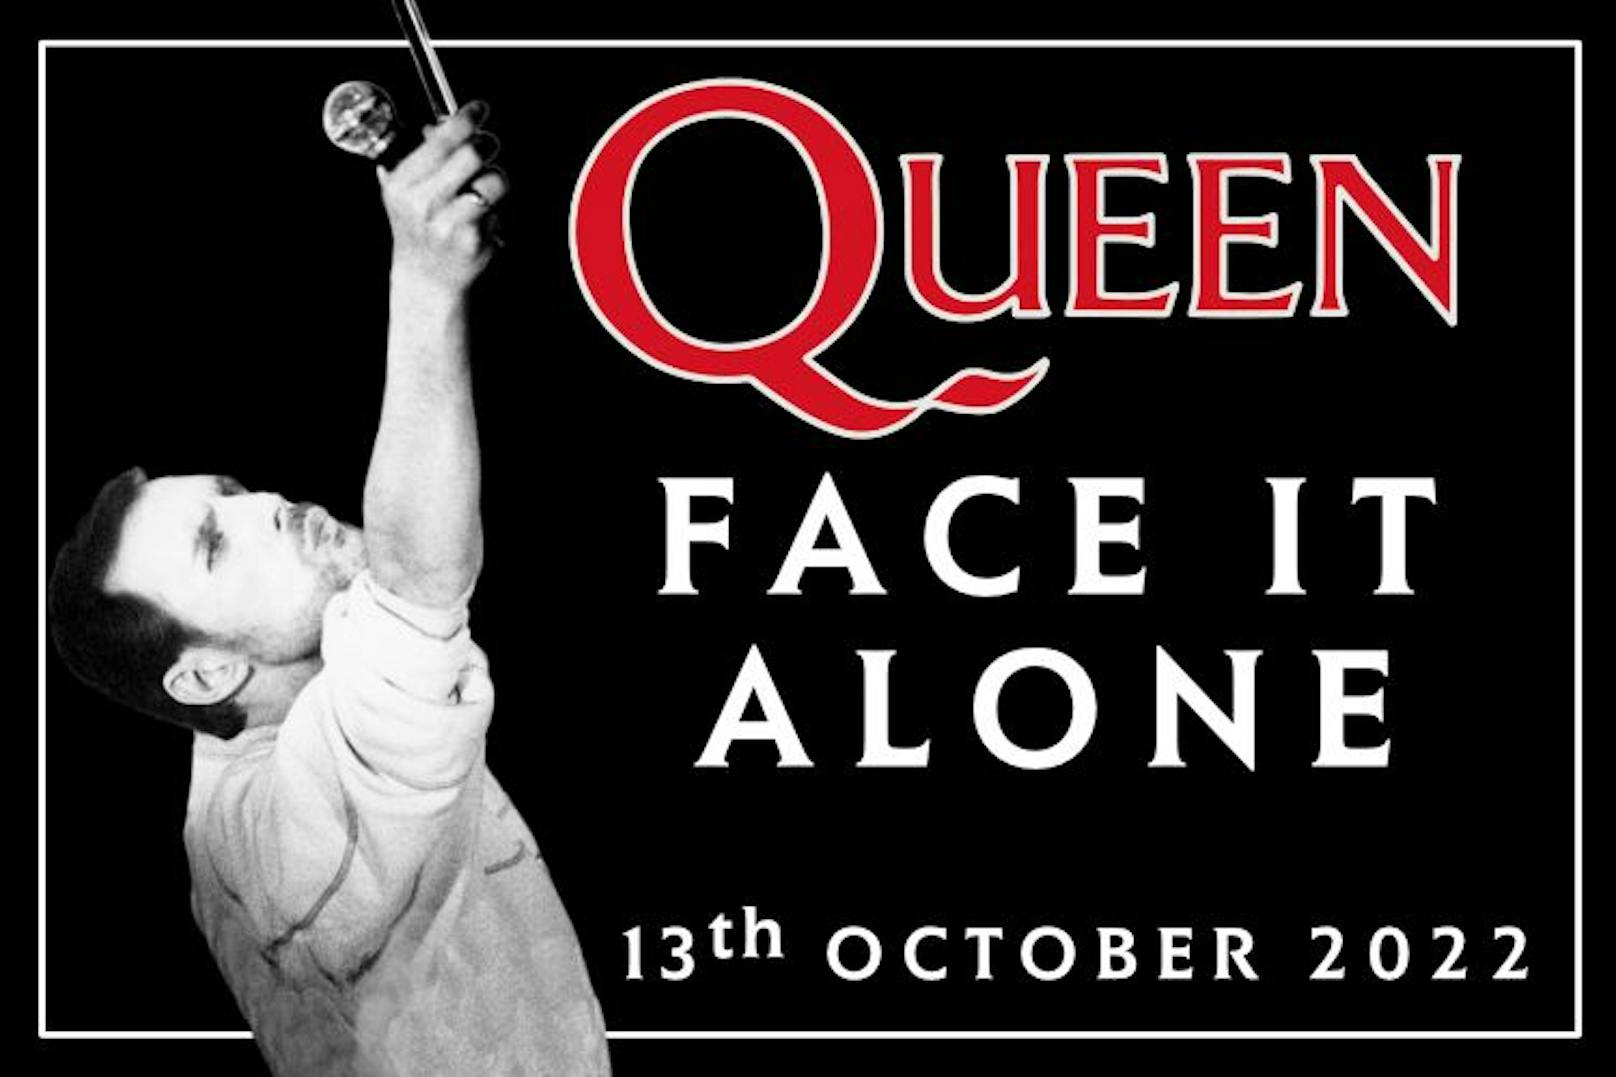 Queen: "Face It Alone"